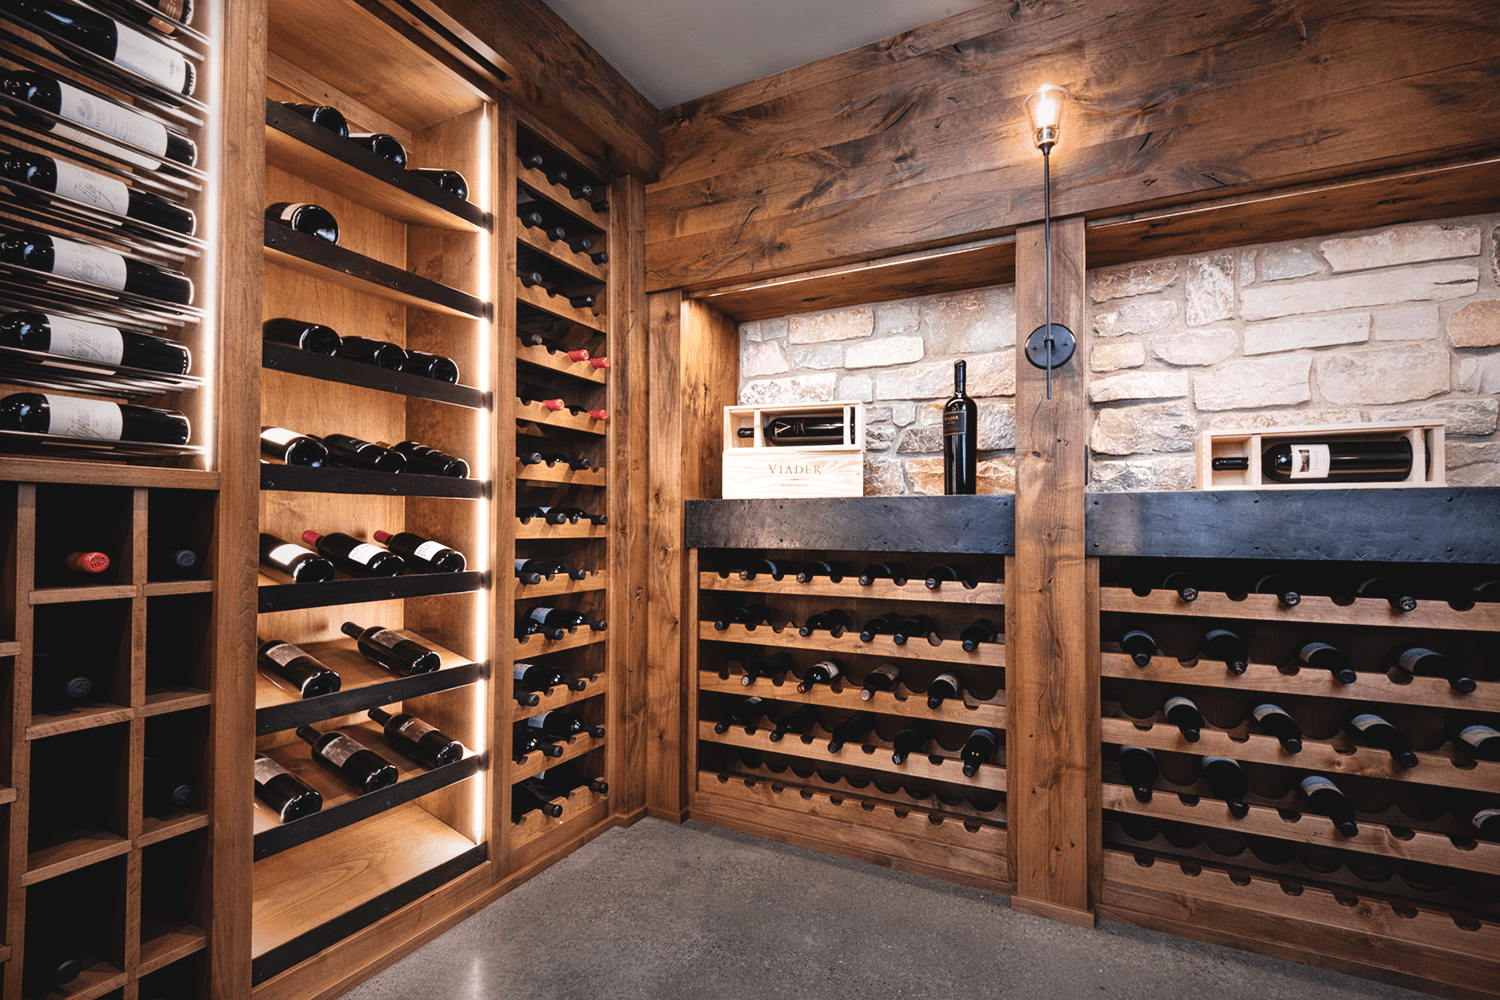 The Benefits of a Wine Cellar: Why Every Wine Lover Needs One